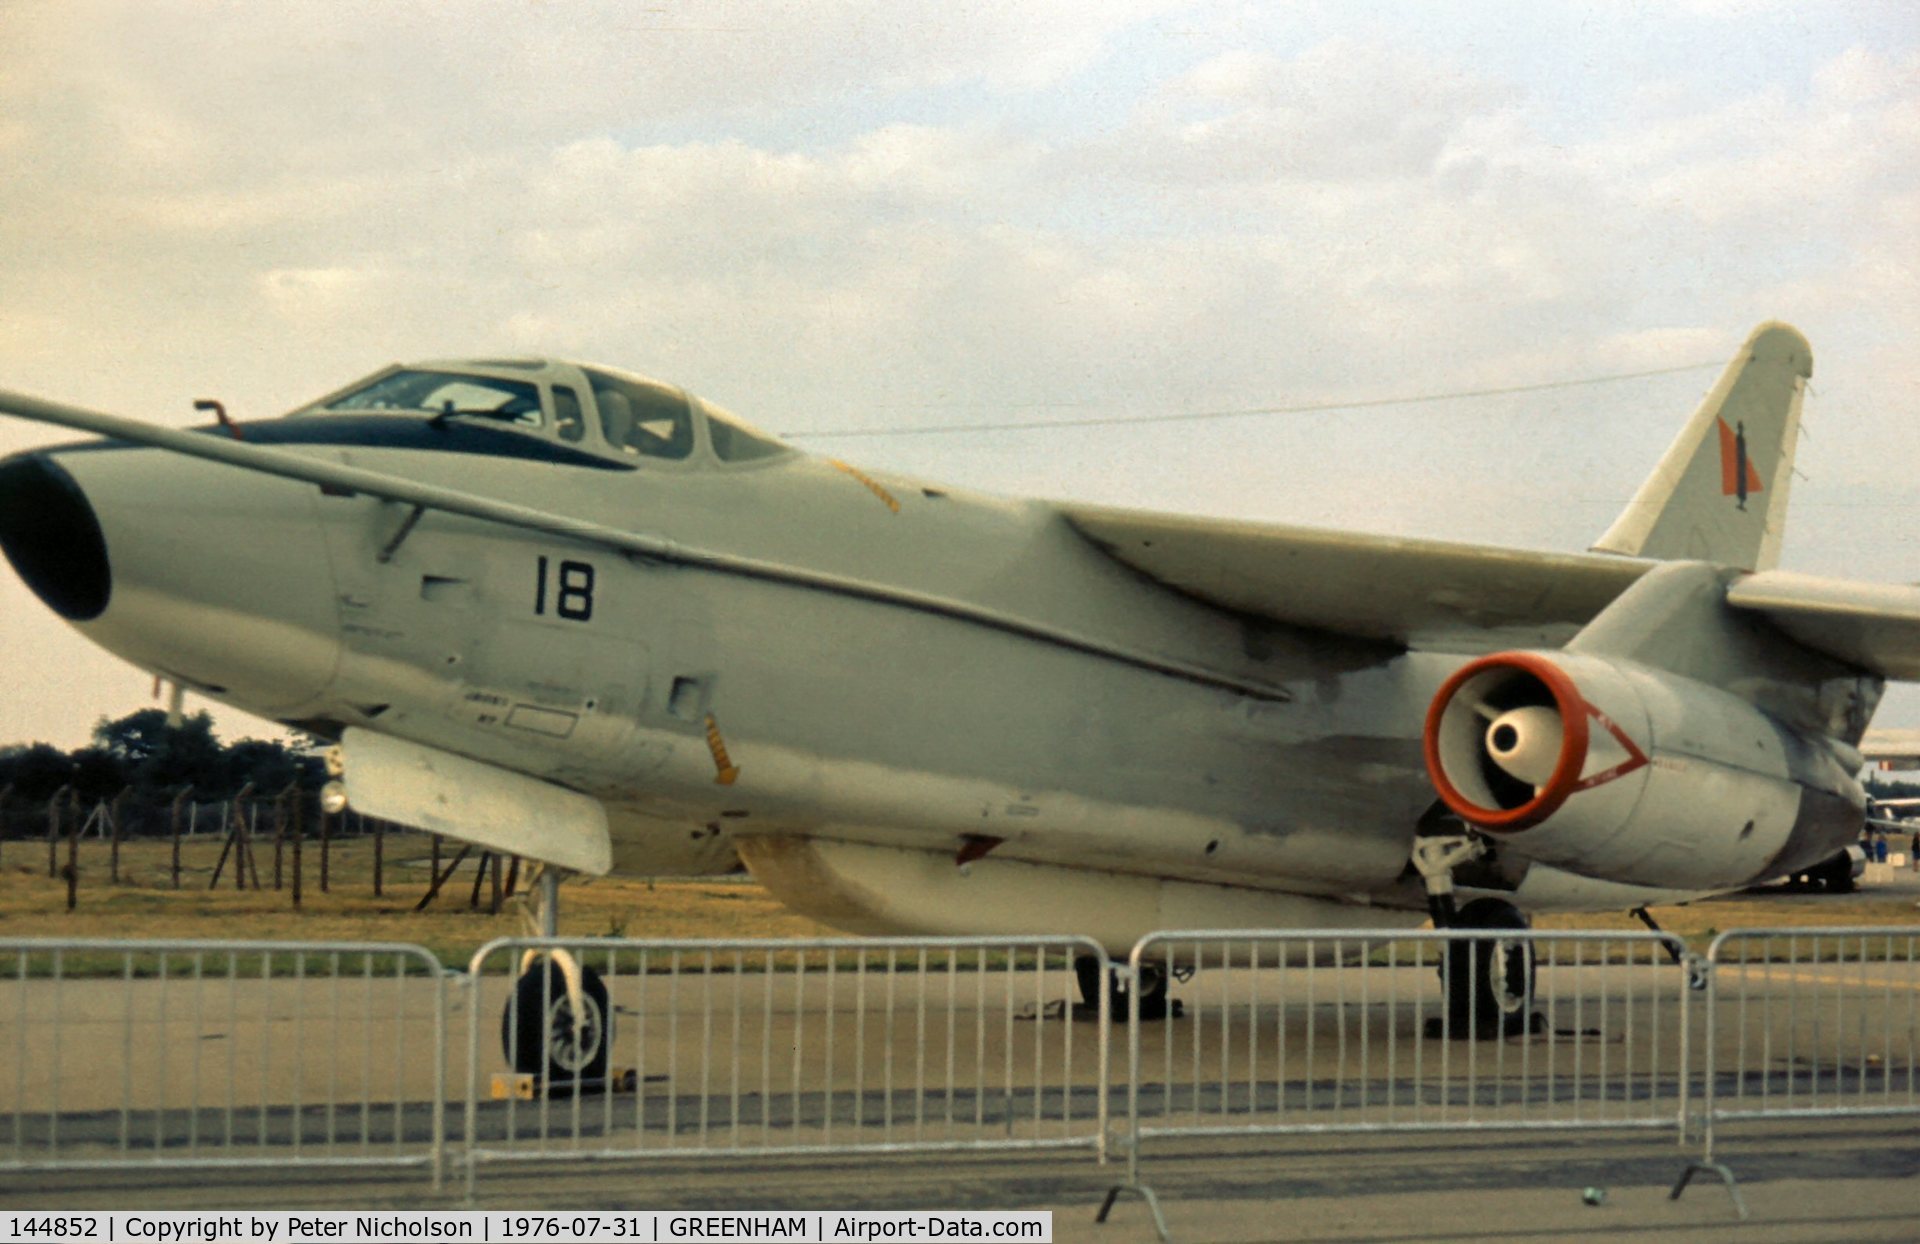 144852, Douglas EA-3B Skywarrior C/N 12098, Another view of the VQ-2 EA-3B Skywarrior at the 1976 Intnl Air Tattoo at RAF Greenham Common.